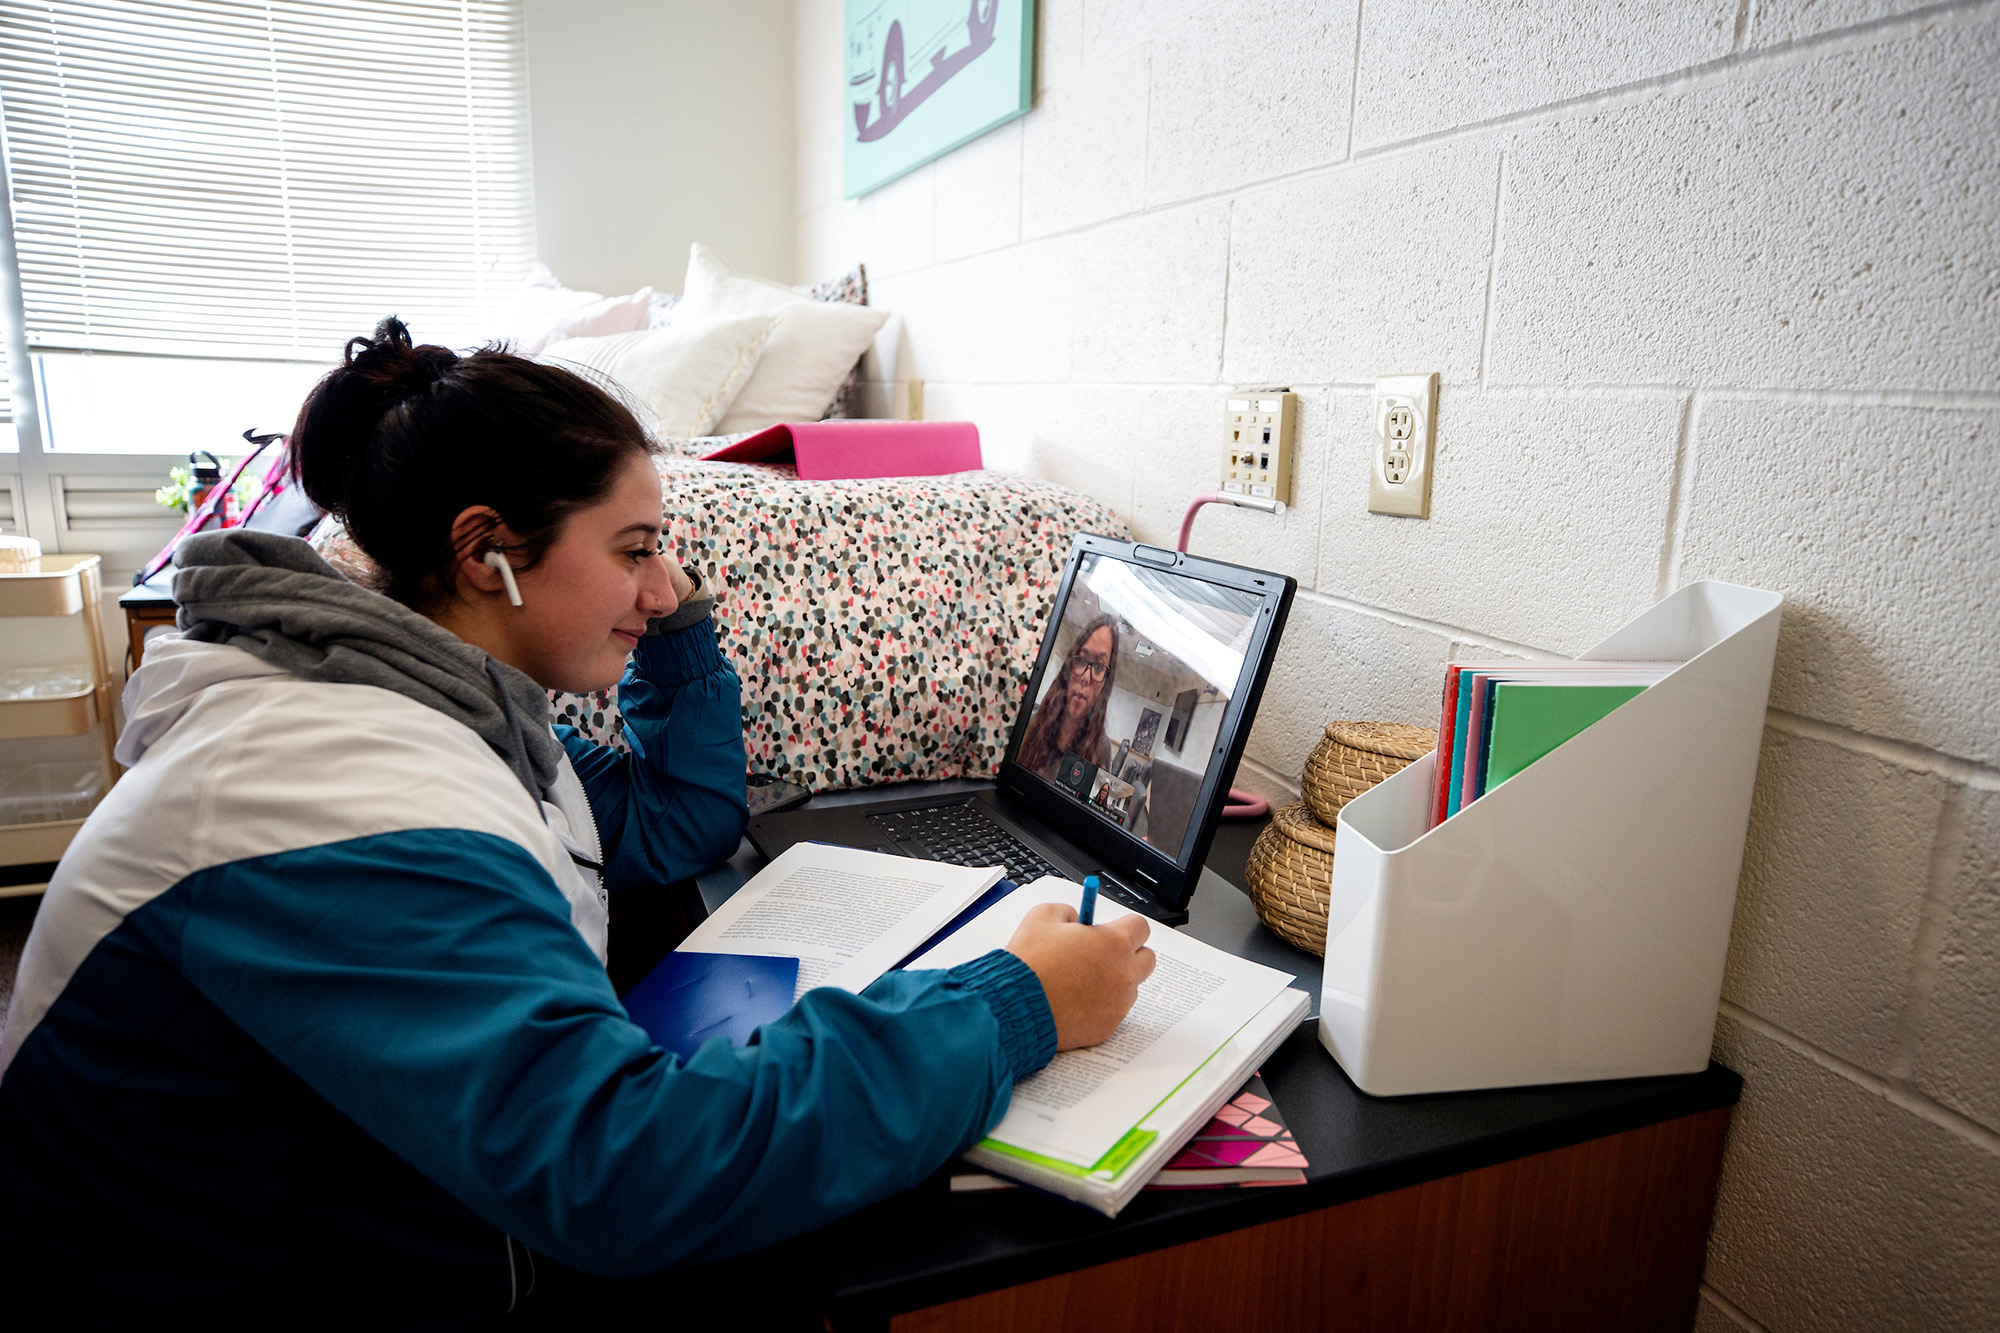 A student studies in a UNLV dorm room.